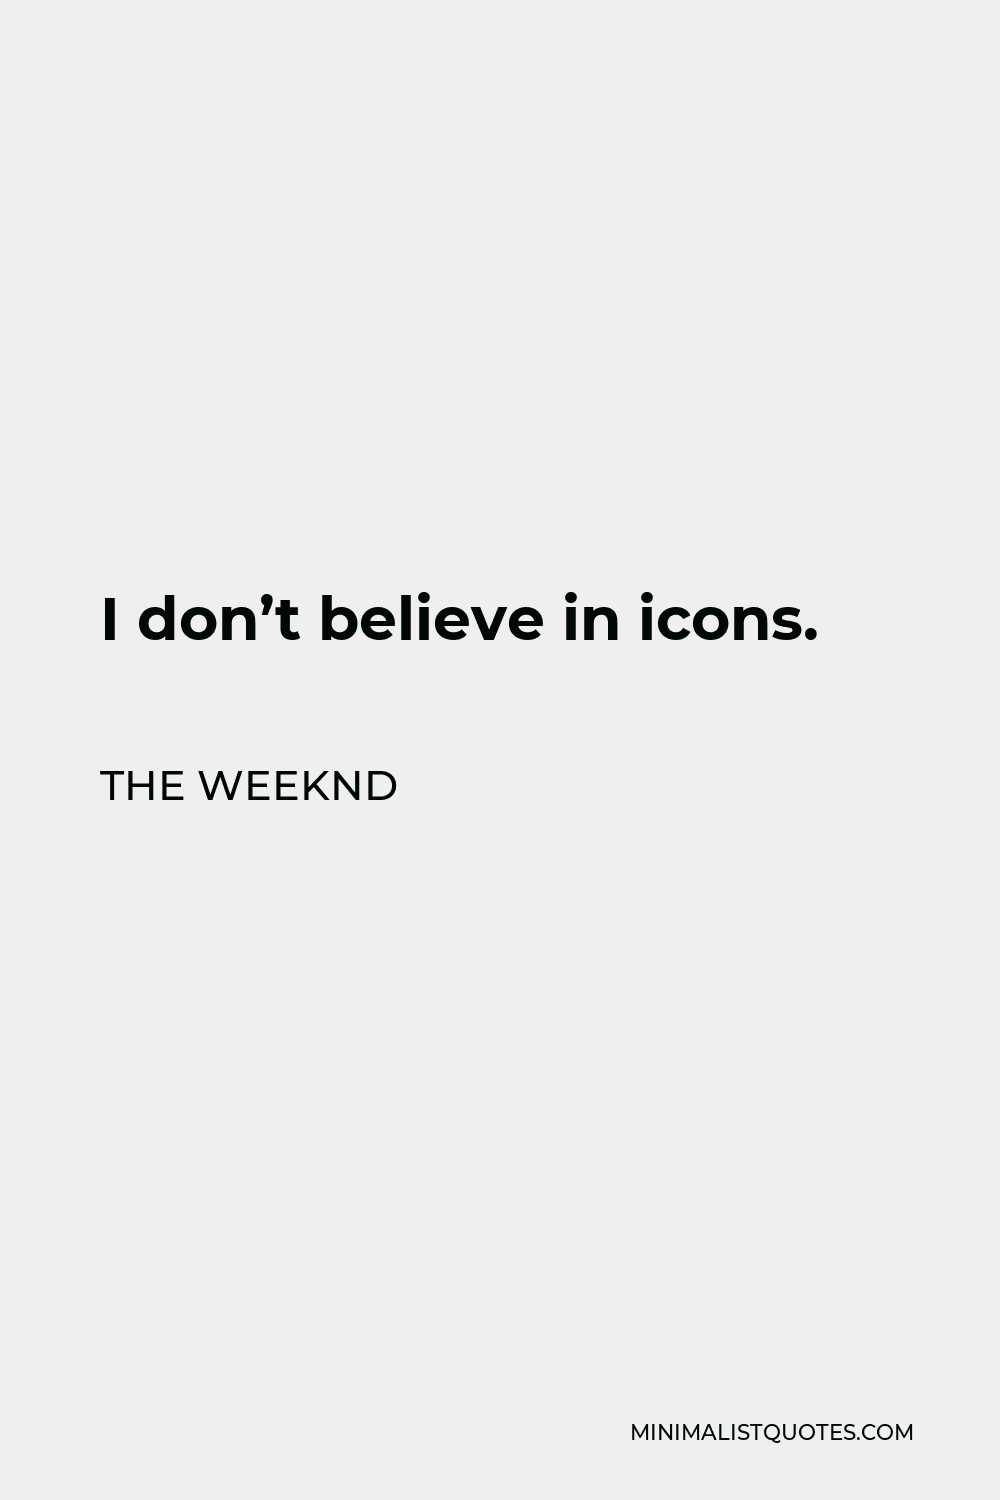 The Weeknd Quote - I don’t believe in icons.